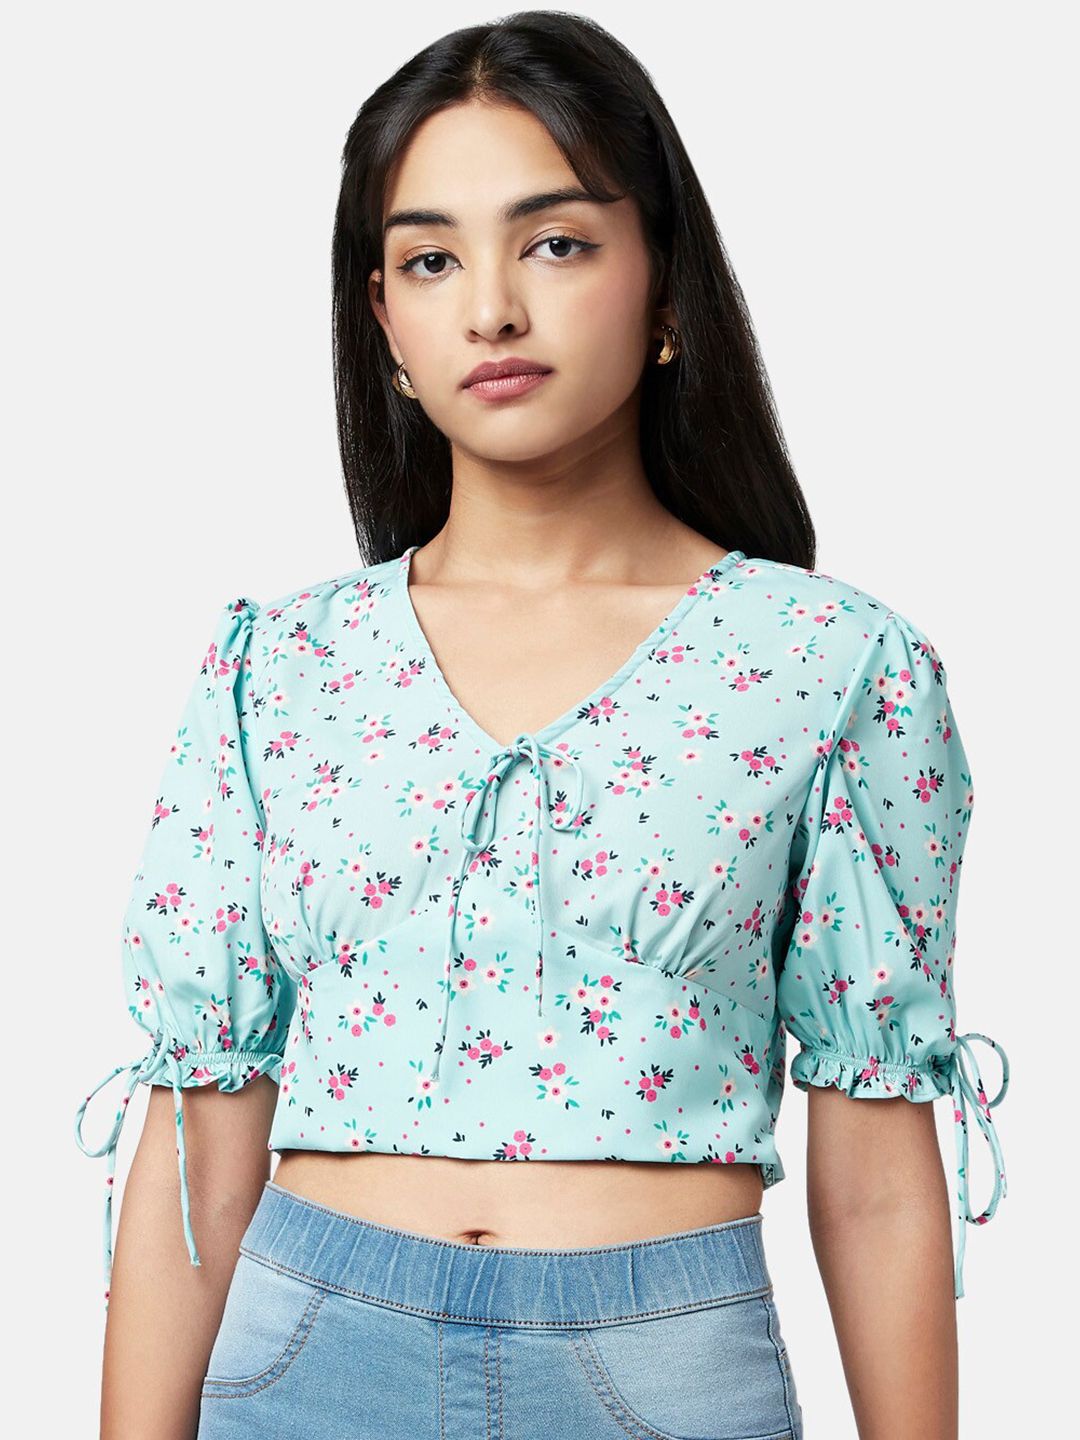 YU by Pantaloons Green Floral Print Tie-Up Neck Crop Top Price in India